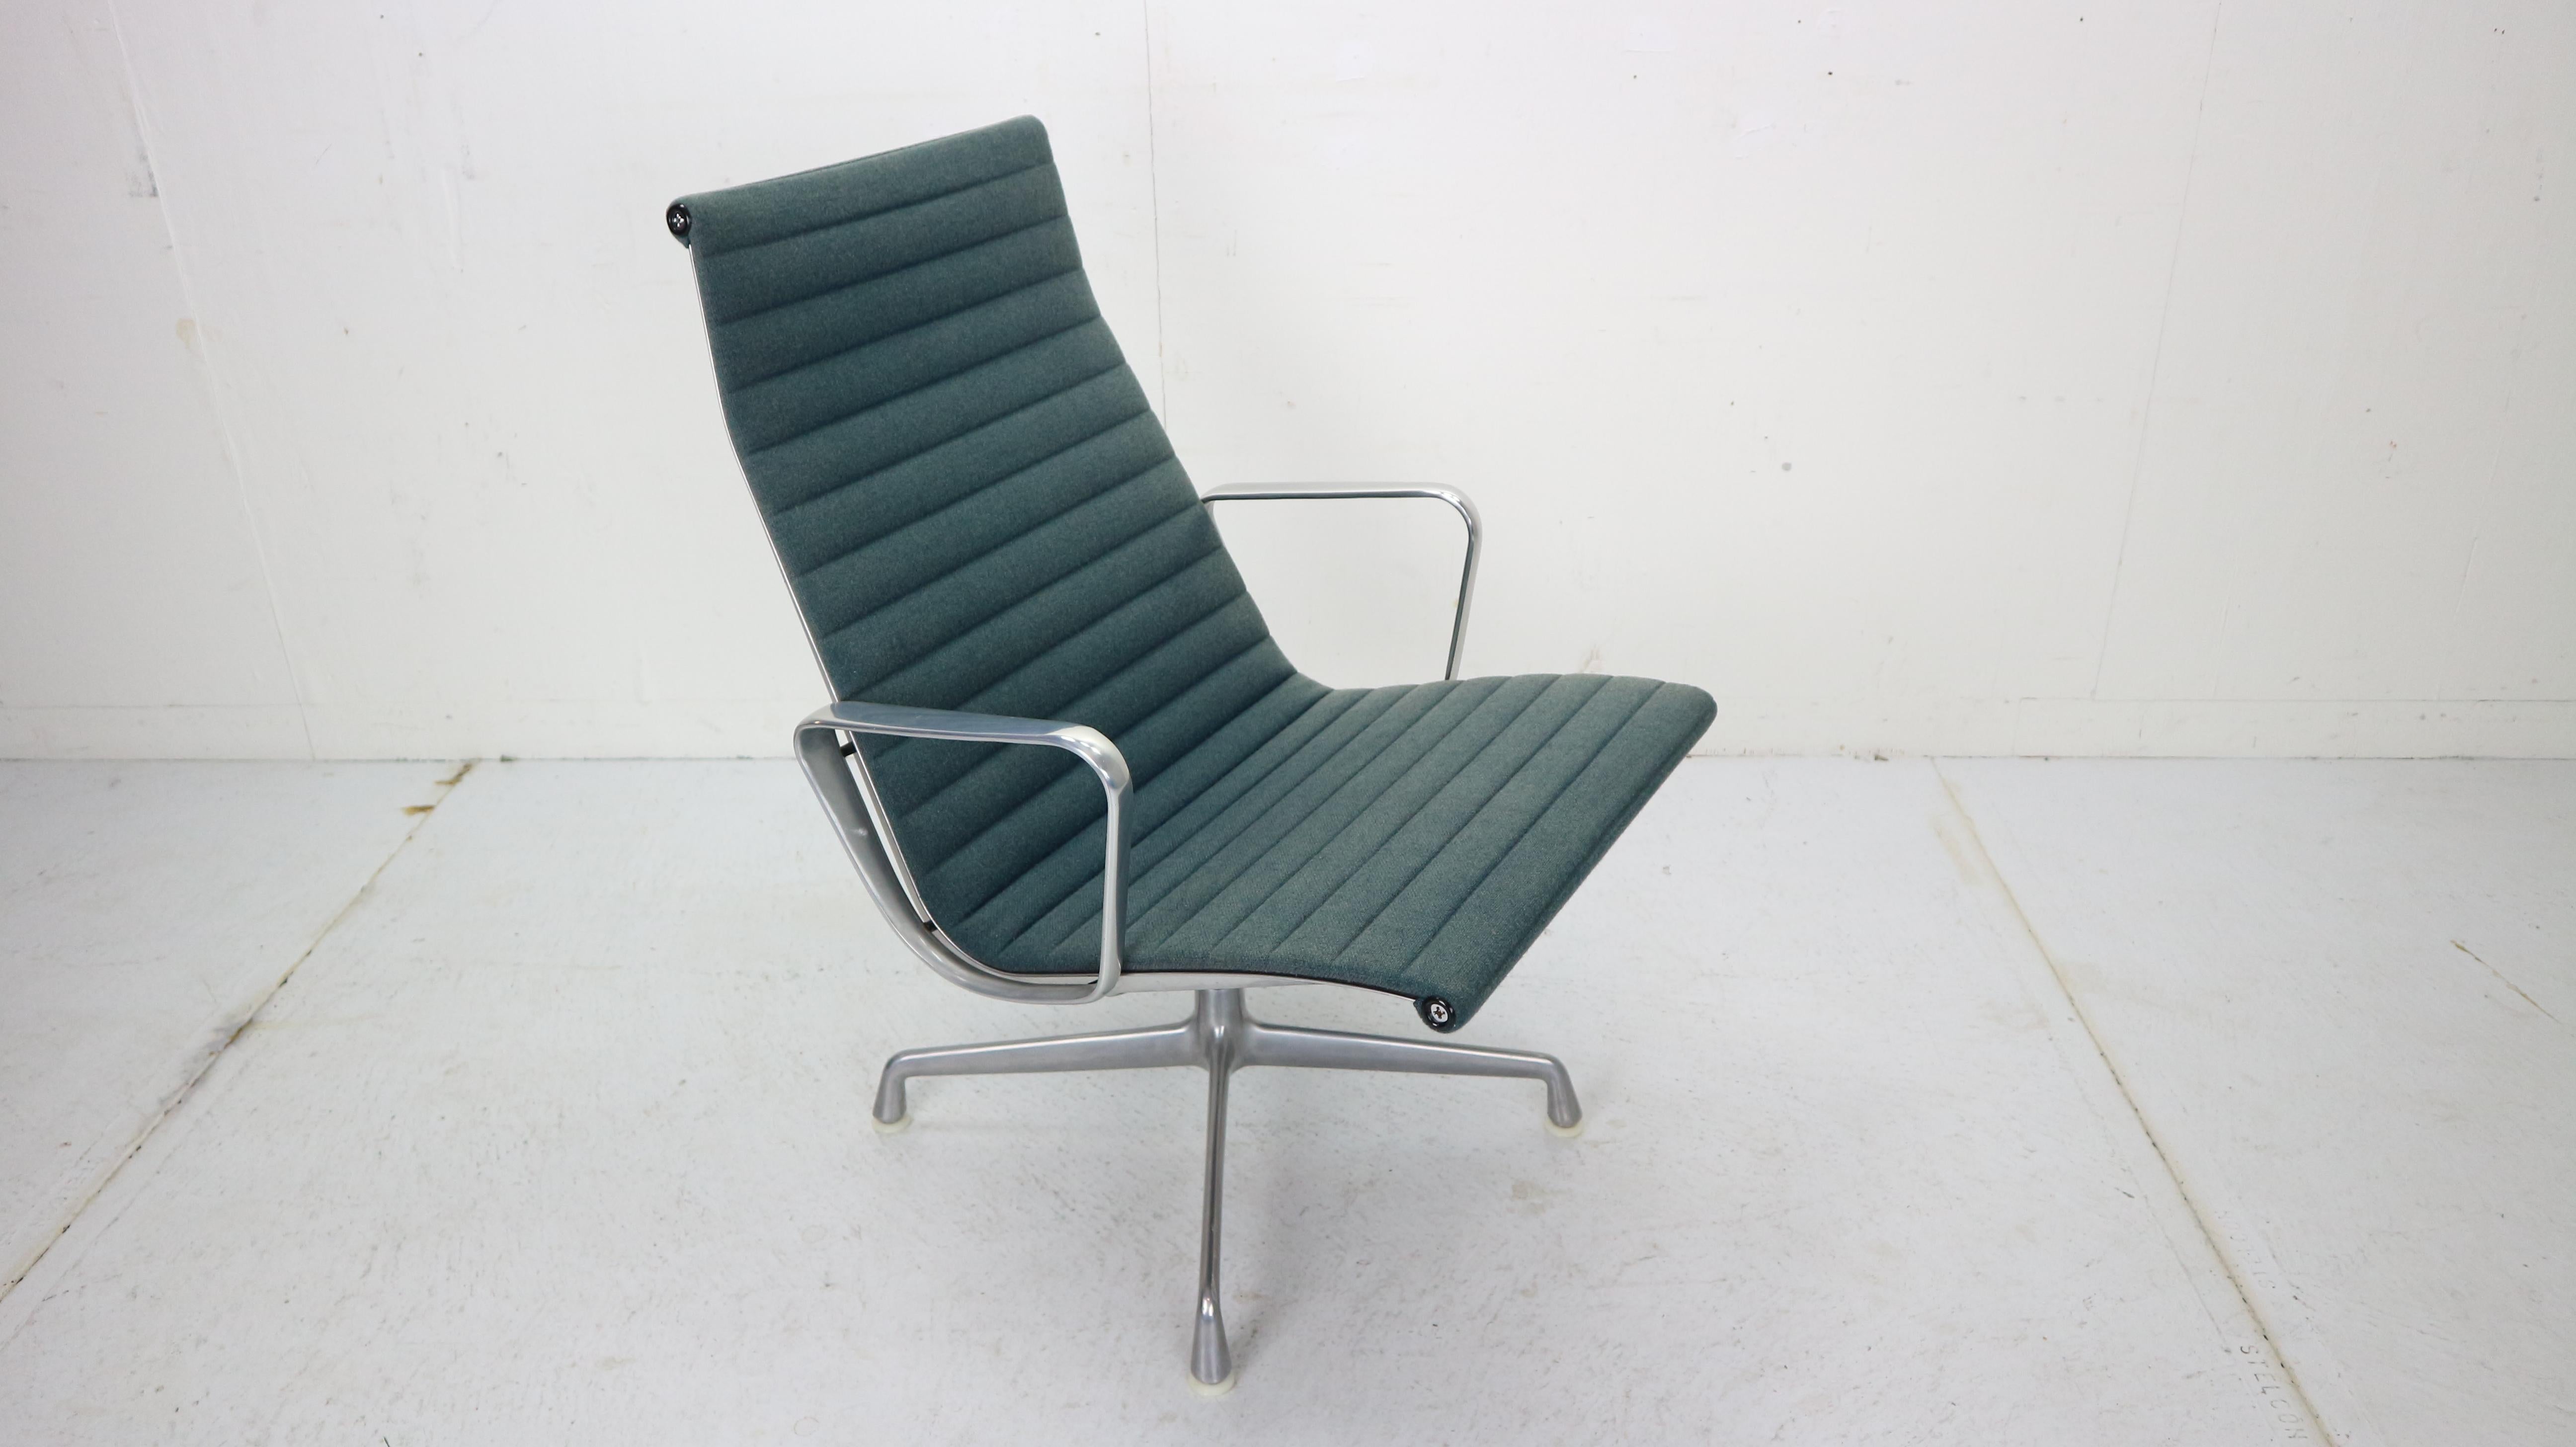 Designers: Charles and Ray Eames.
Maker: Vitra - 1989.
Design year: 1958.
Model: EA116 Hopsack (high back, arms and swivel).

The EA 116 Aluminium Group easy chair from 1958 is one of the greatest furniture designs of the 20th century. It